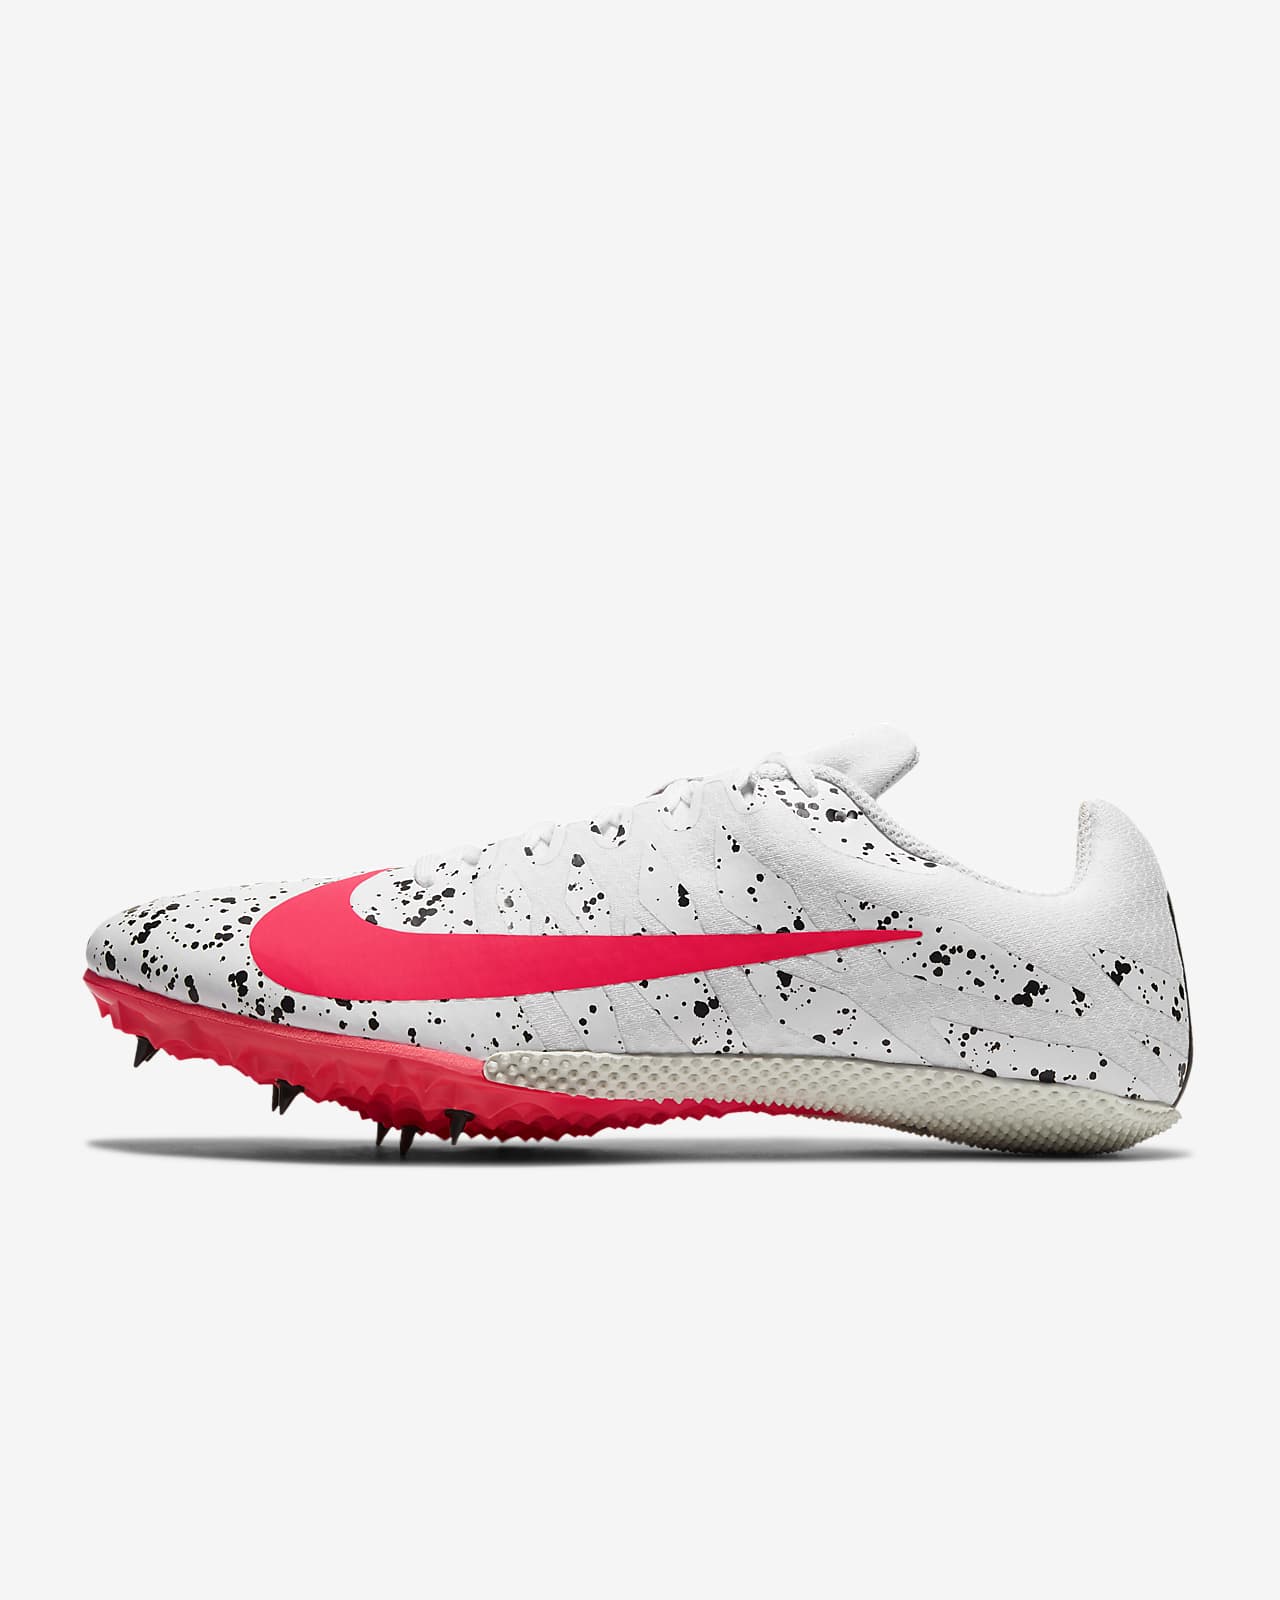 nike zoom rival s 9 spike size